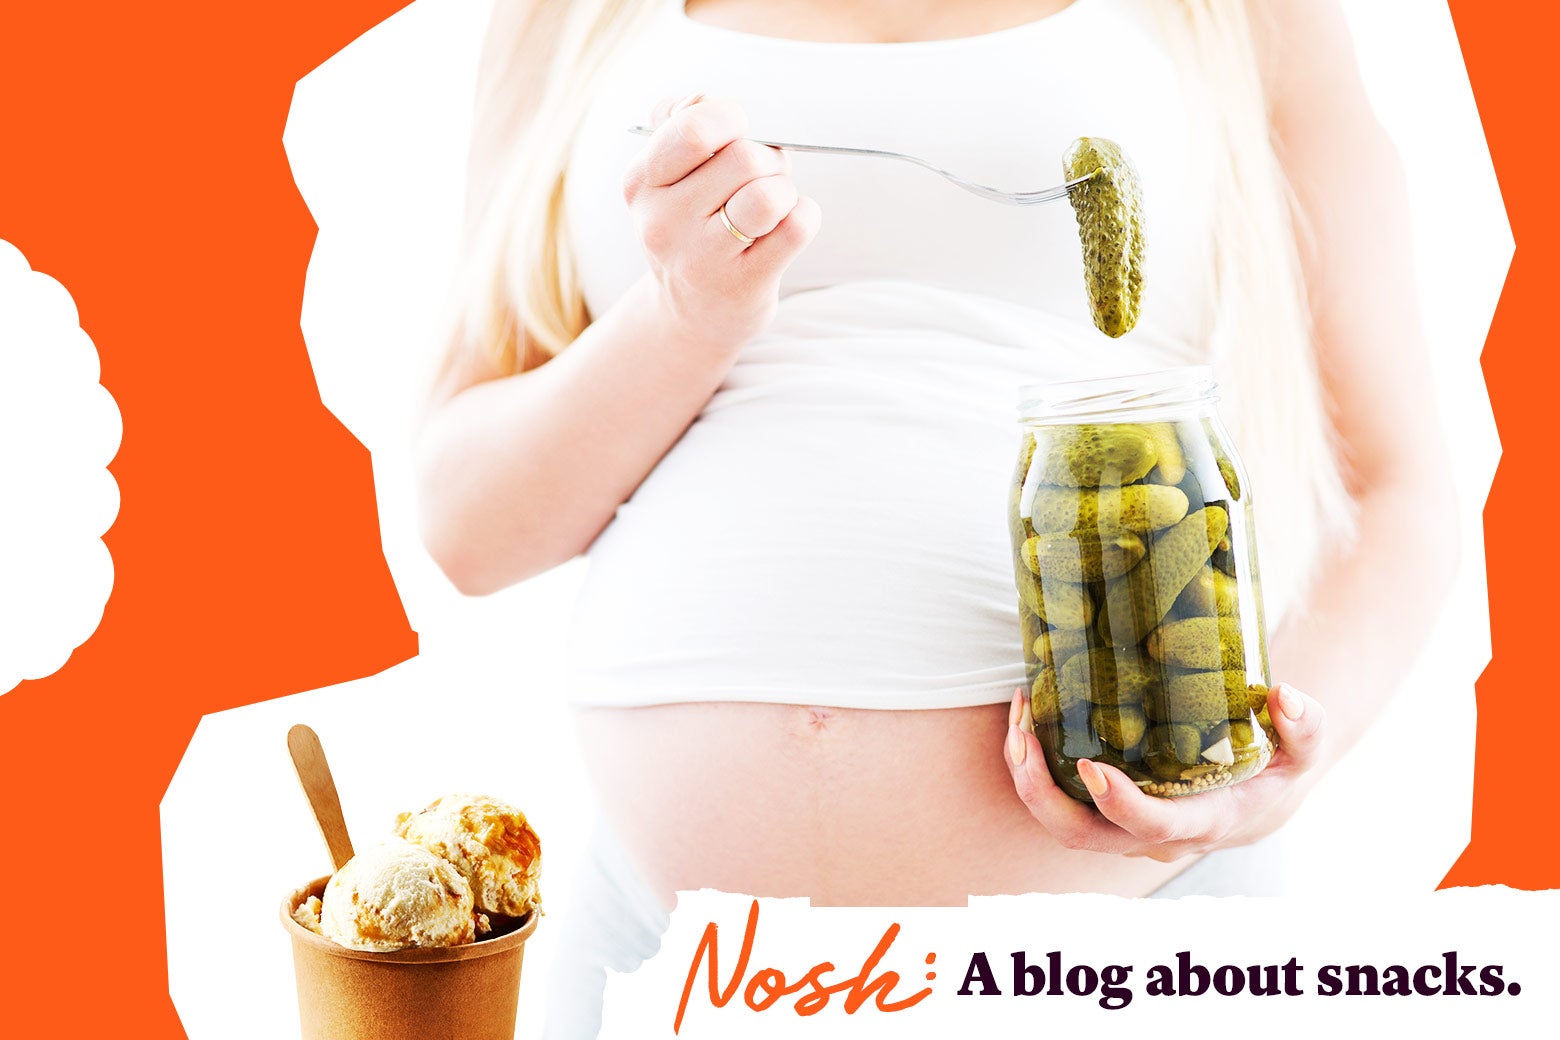 A pregnant woman eating pickles and ice cream.